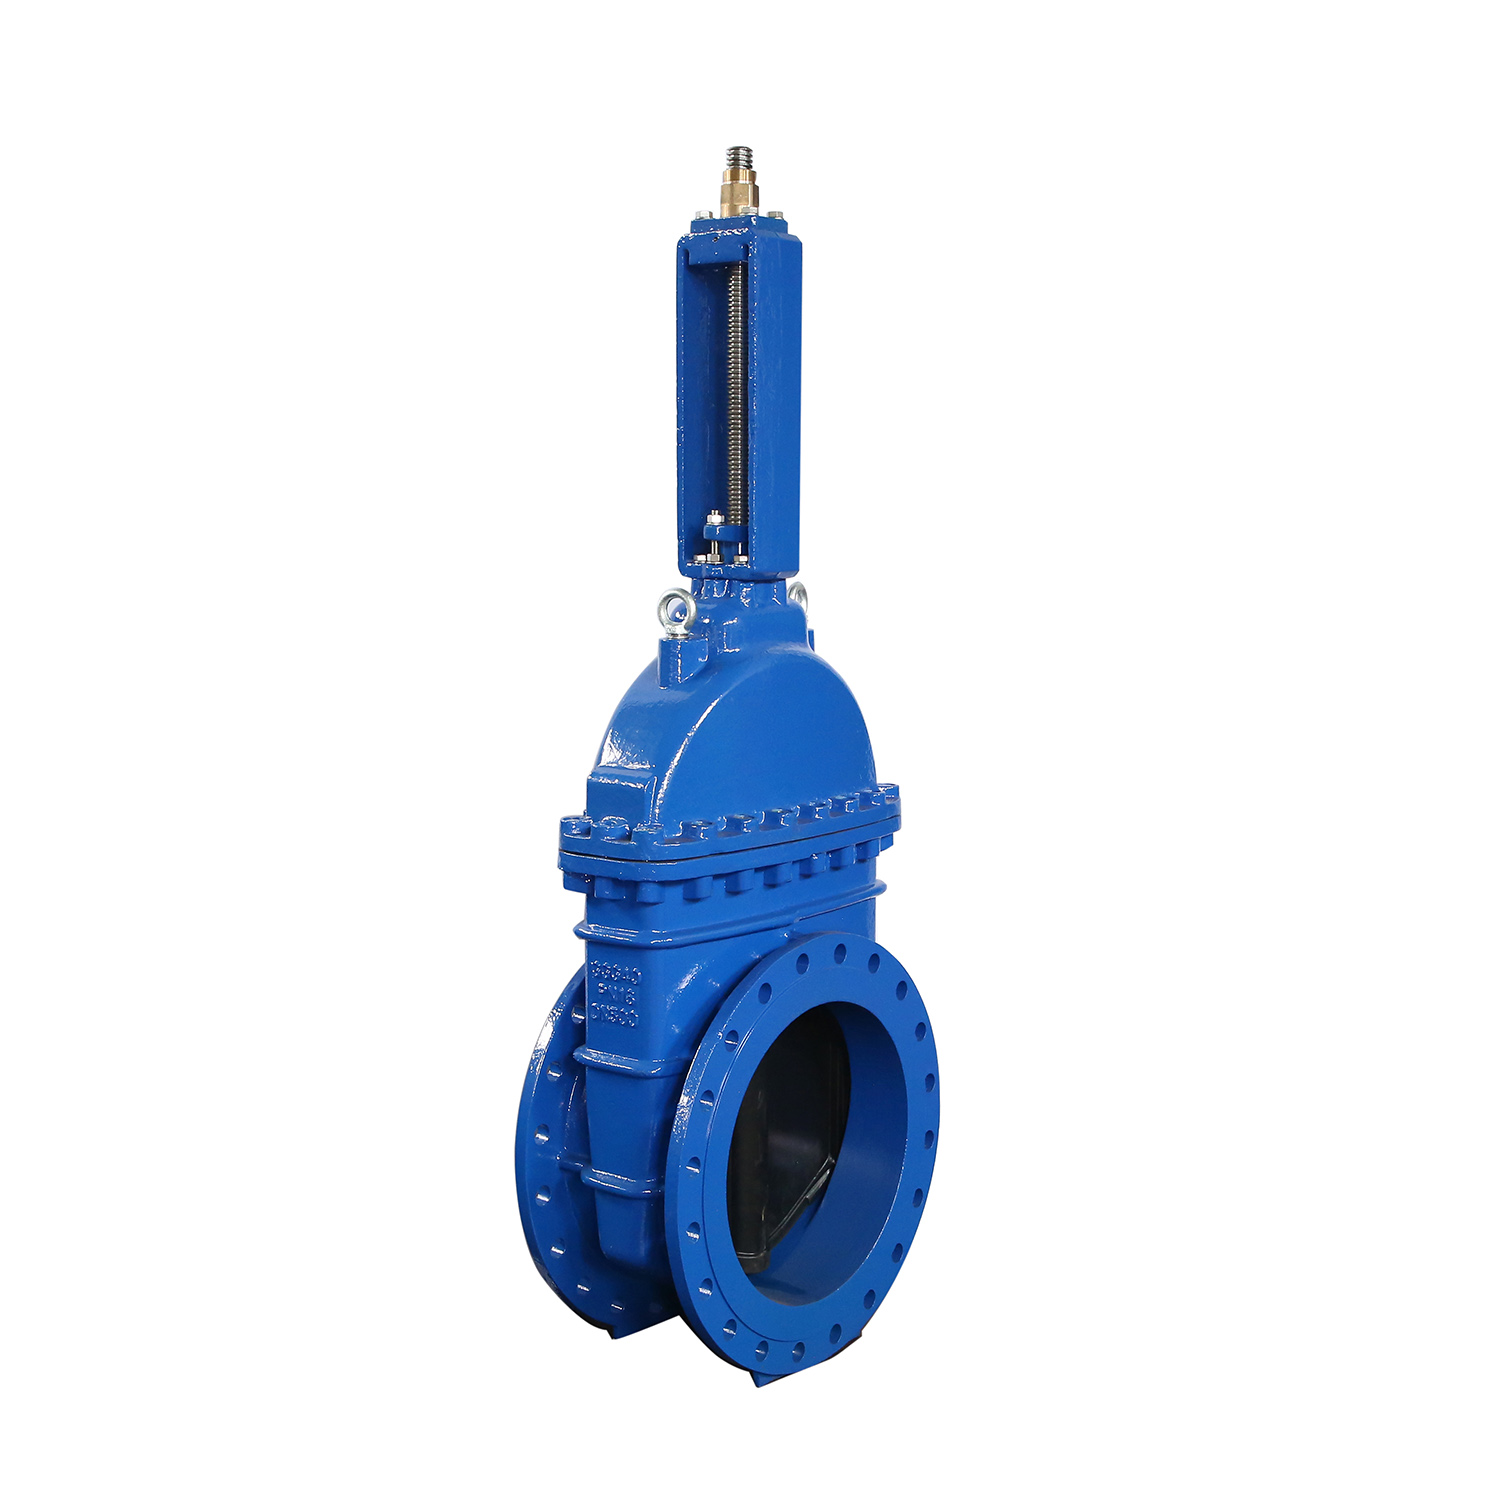 Soft seal ( resilient seat) gate valve Featured Image